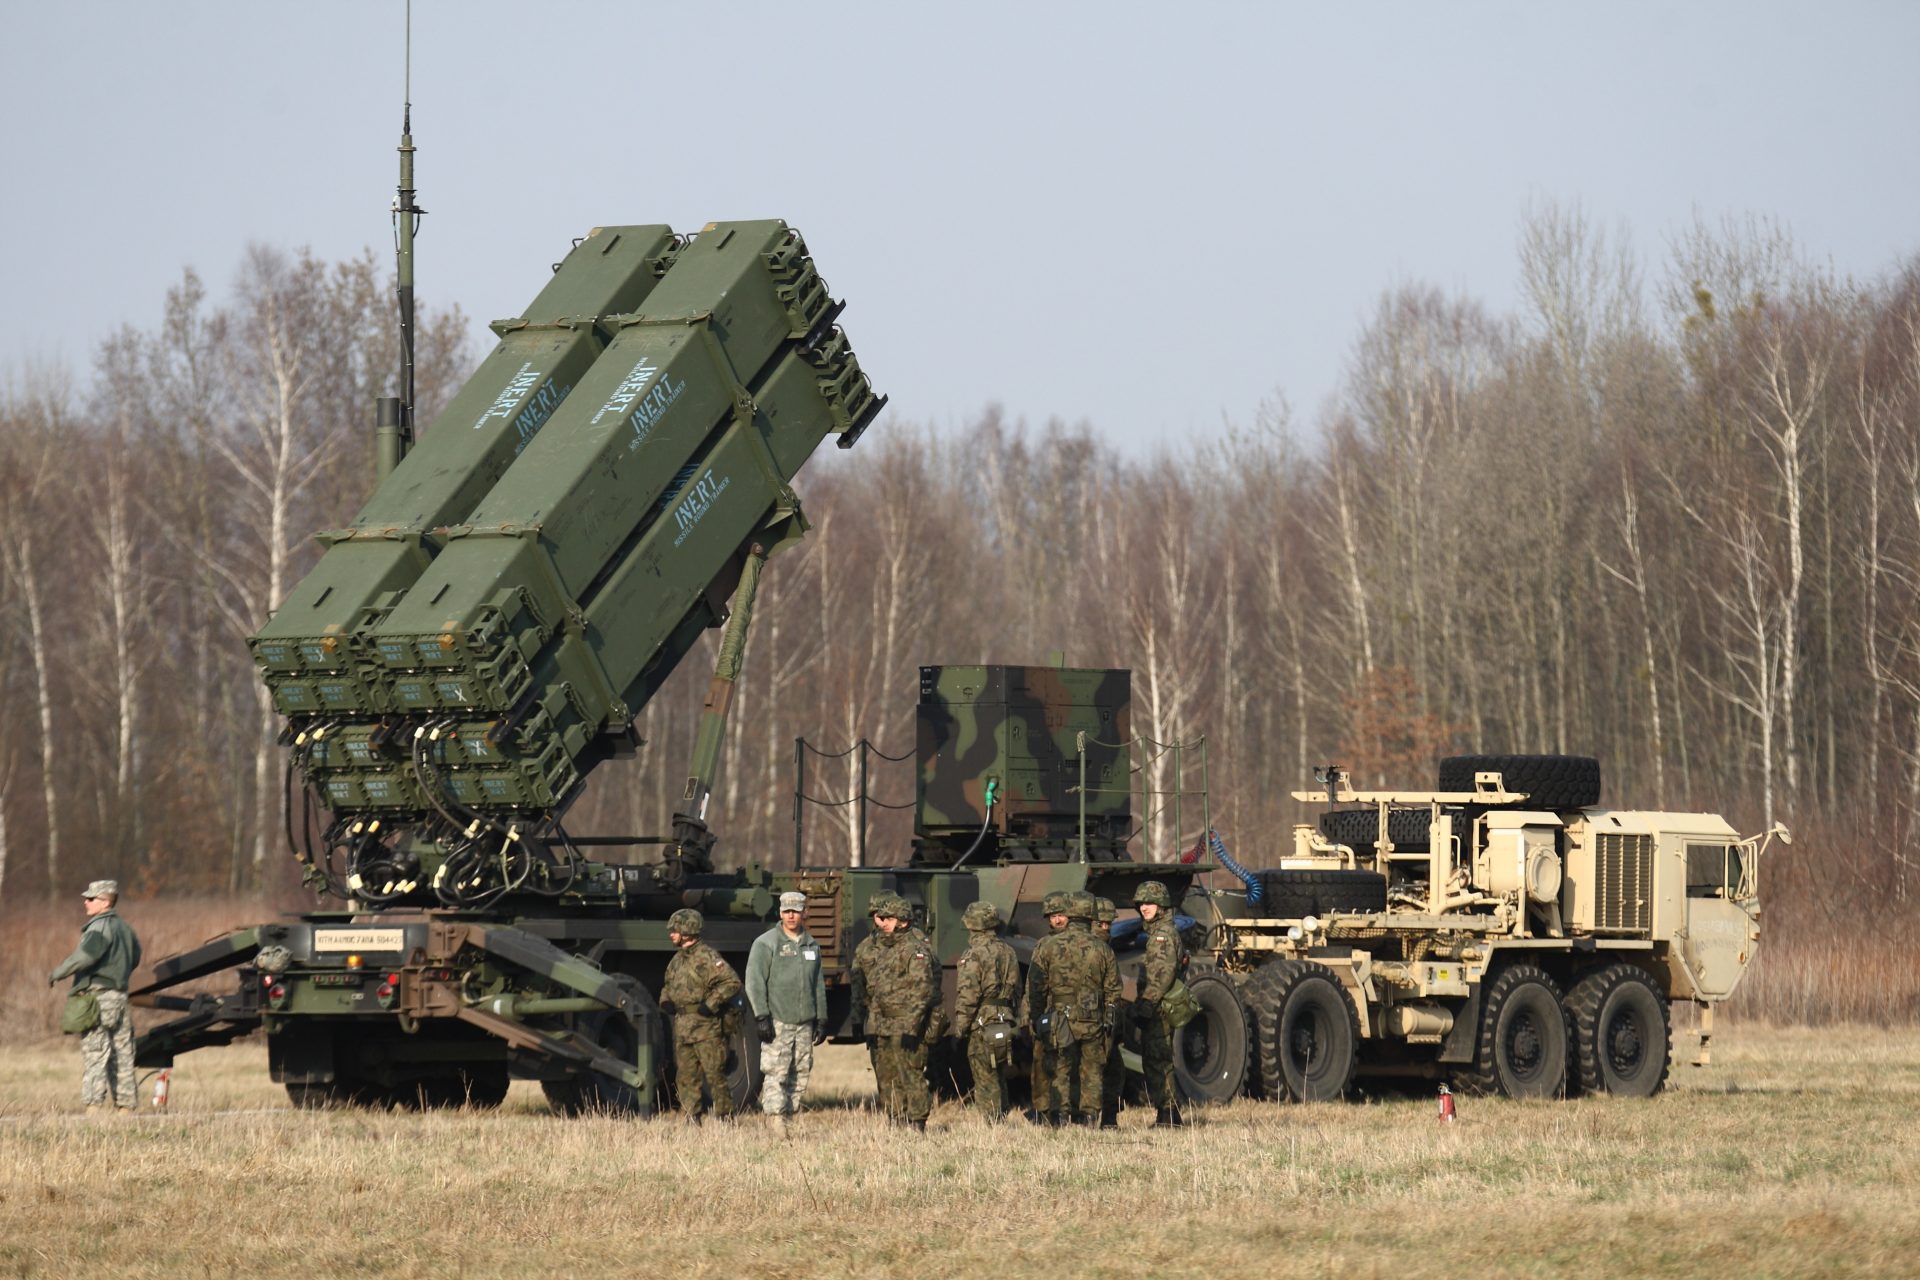 A new missile for Ukraine 